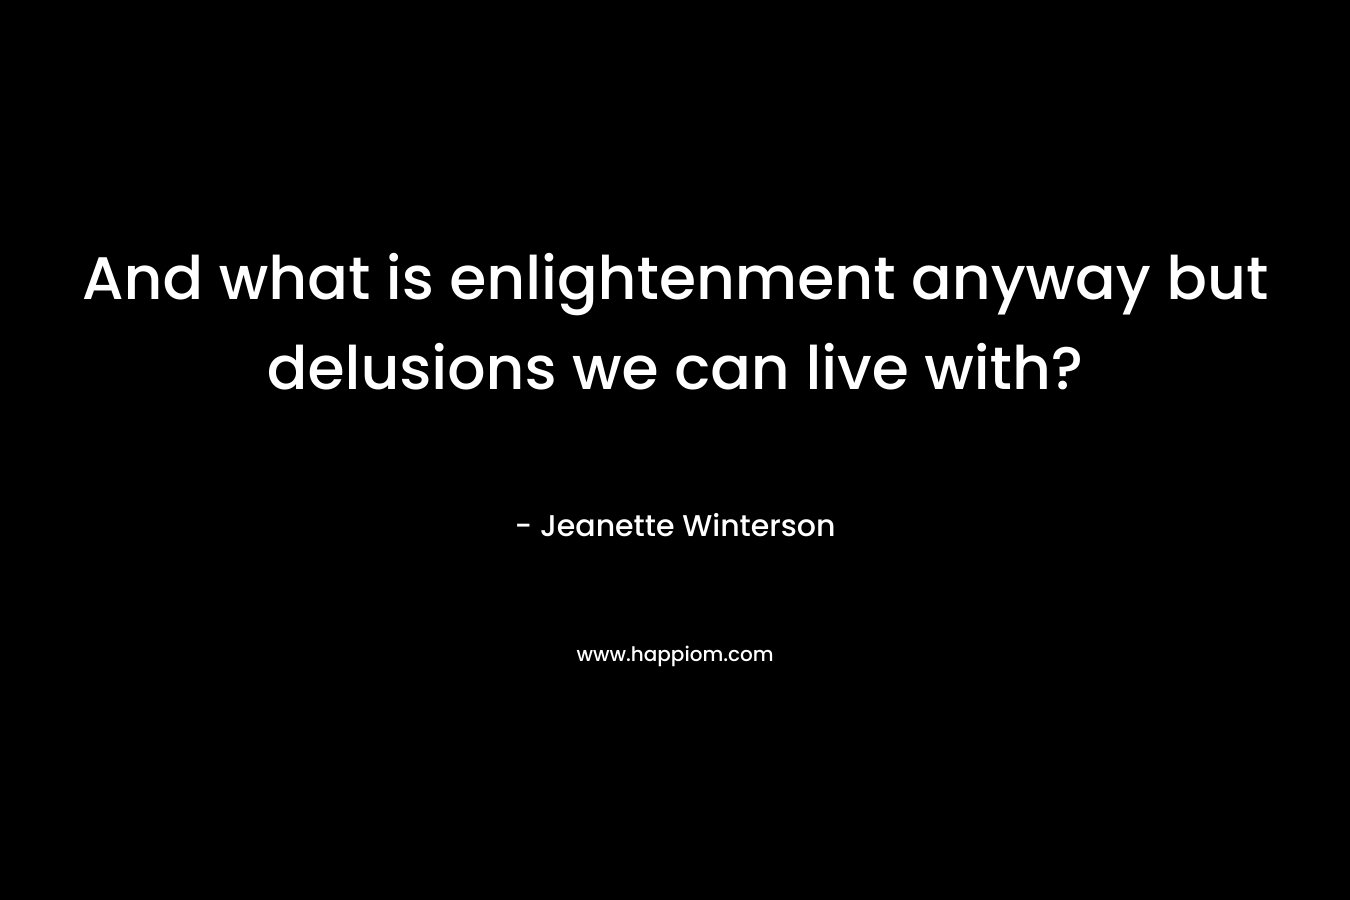 And what is enlightenment anyway but delusions we can live with? – Jeanette Winterson